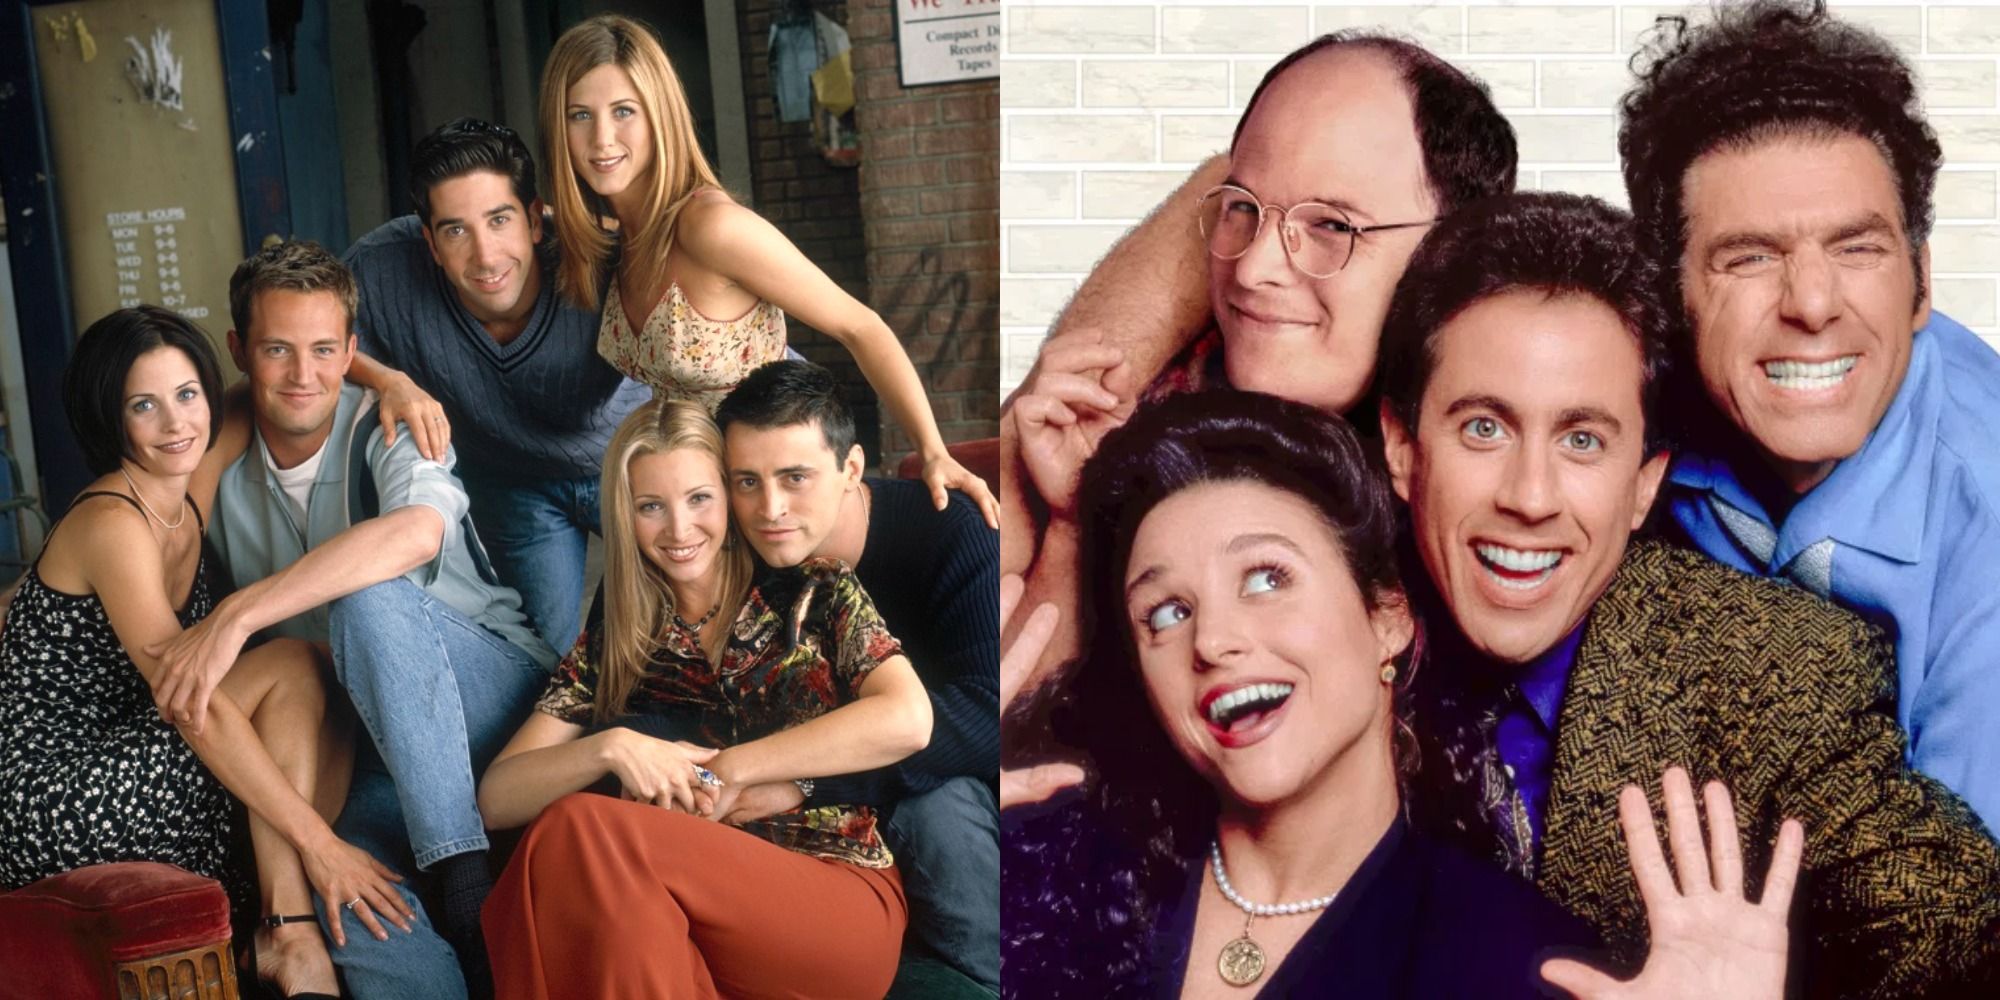 Side-by-side photo of the casts of Friends and Seinfeld